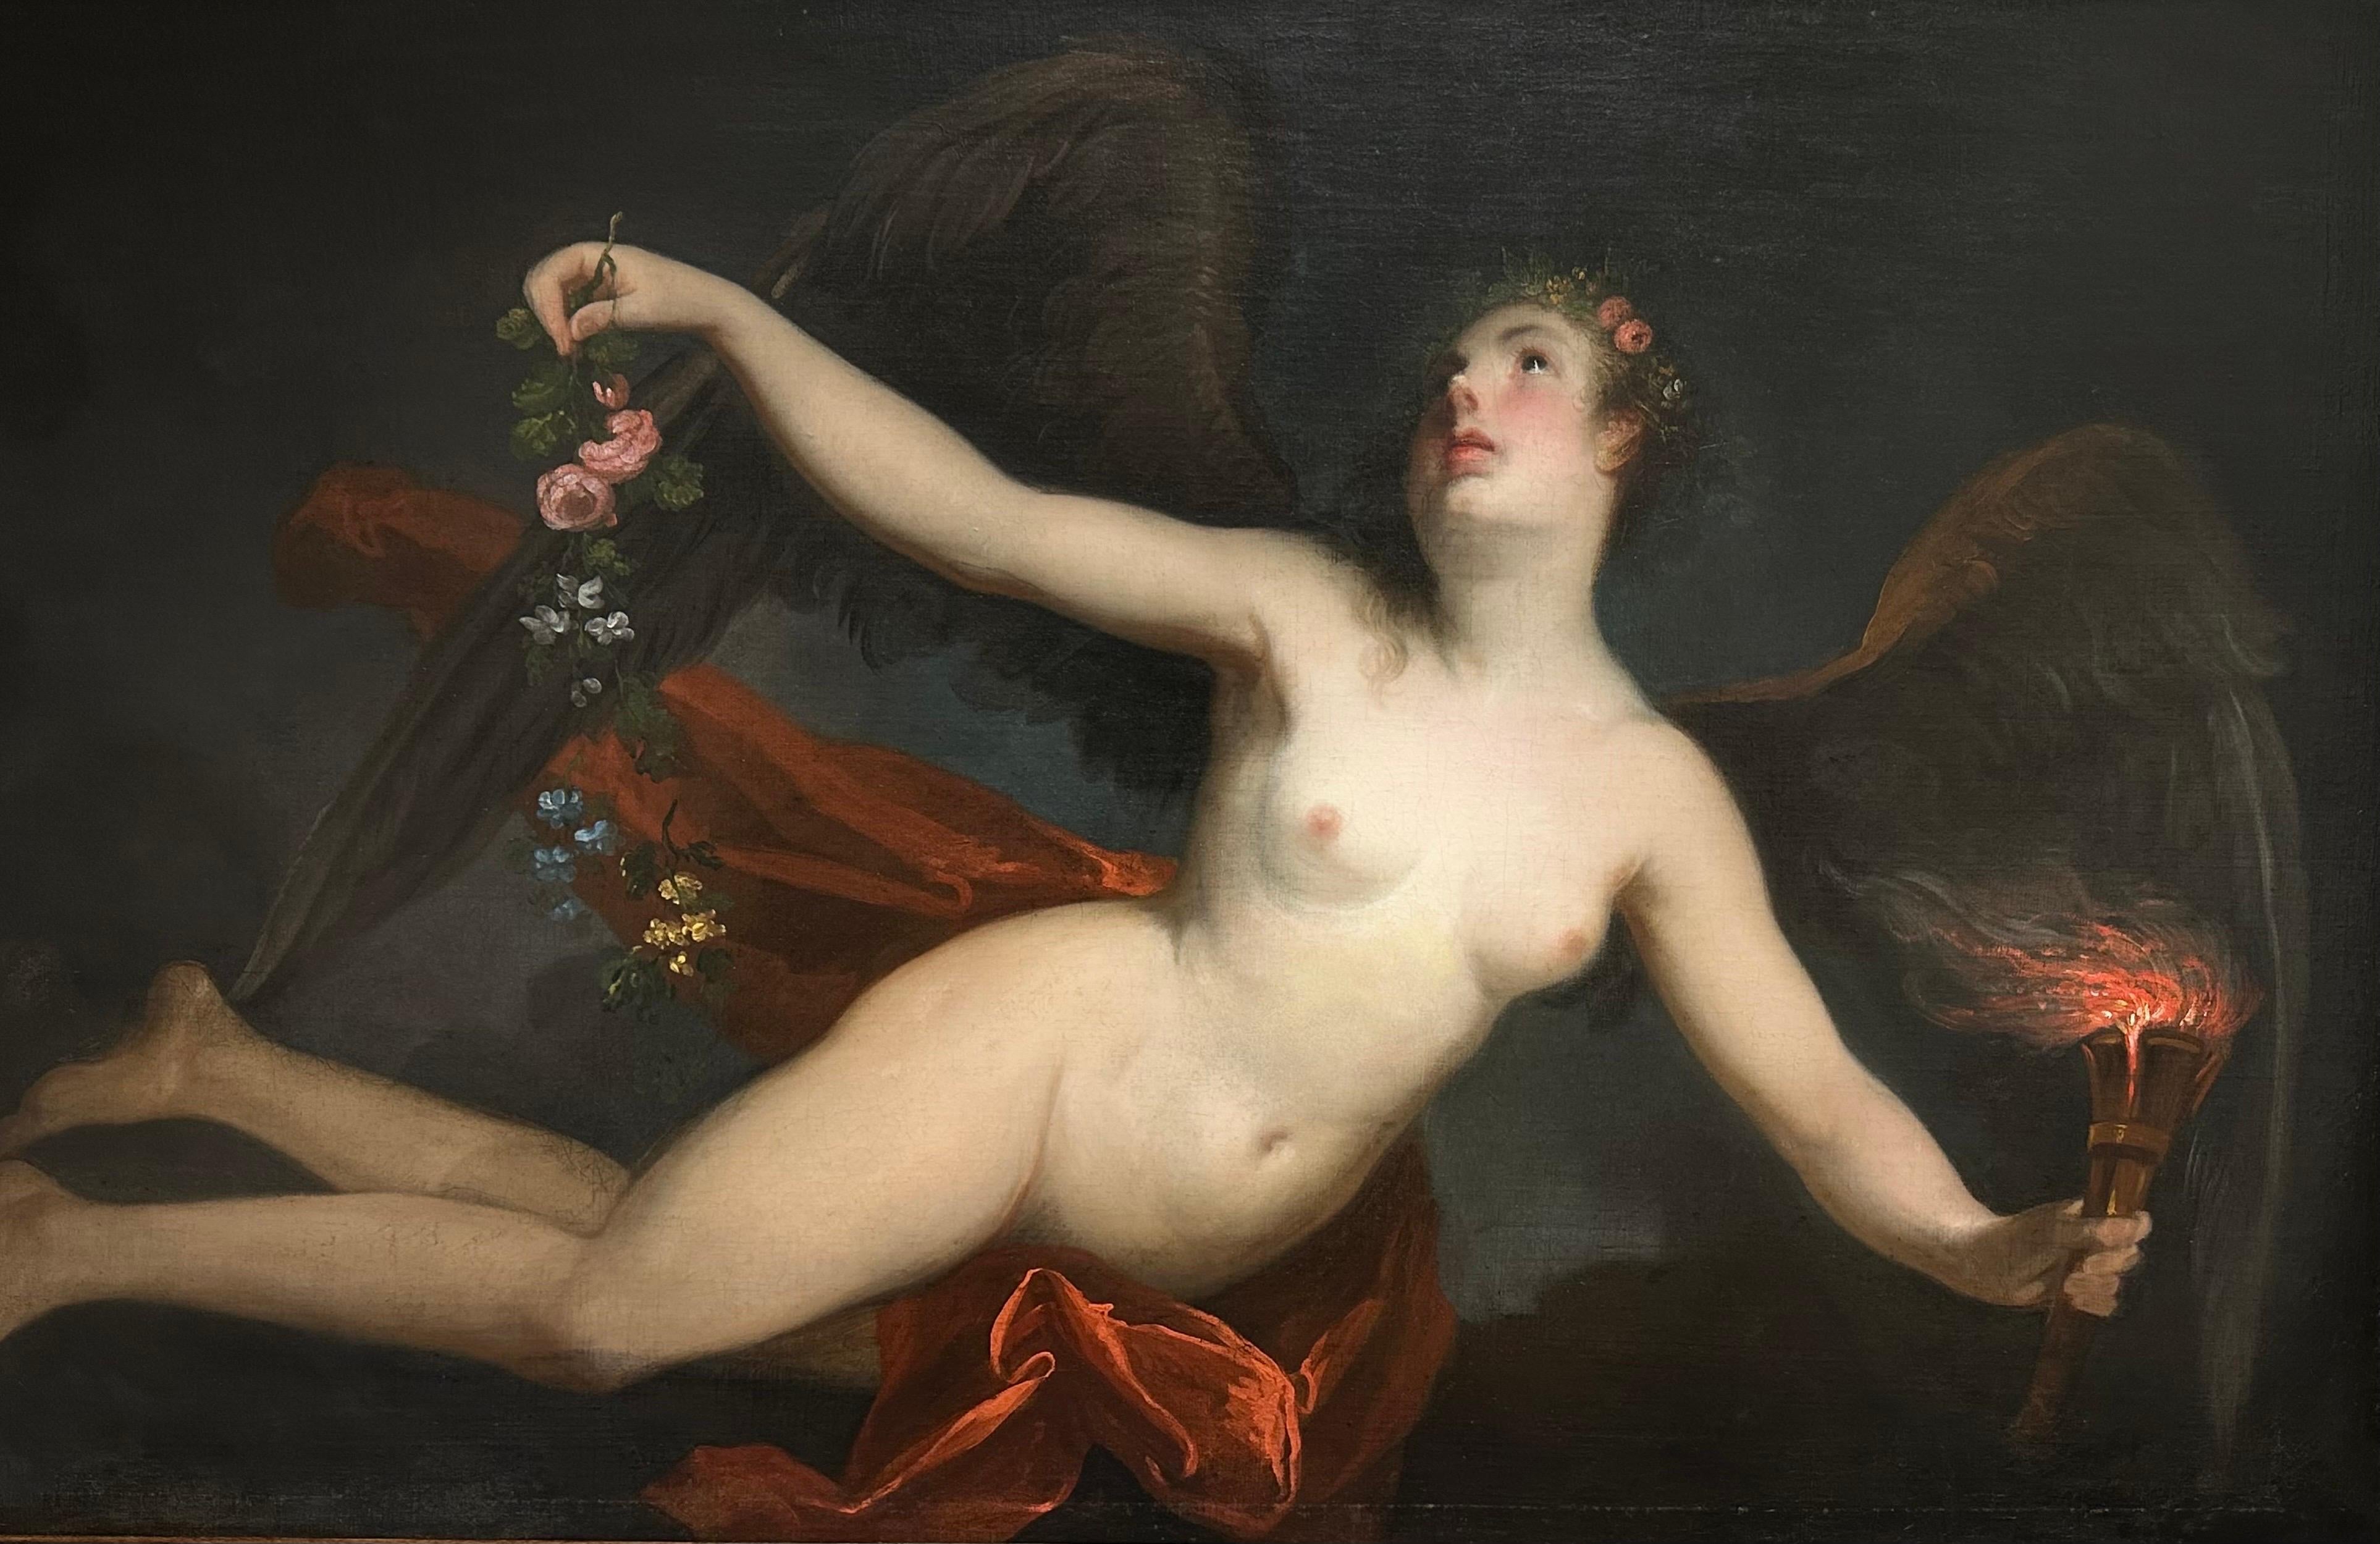 The Allegorical Winged Nude Lady, adorned with the attributes of Spring
French School, 18th century (Rococo period)
oil painting on canvas, unframed
canvas: 30 x 52 inches
provenance: private collection, Champagne region of France
condition: very